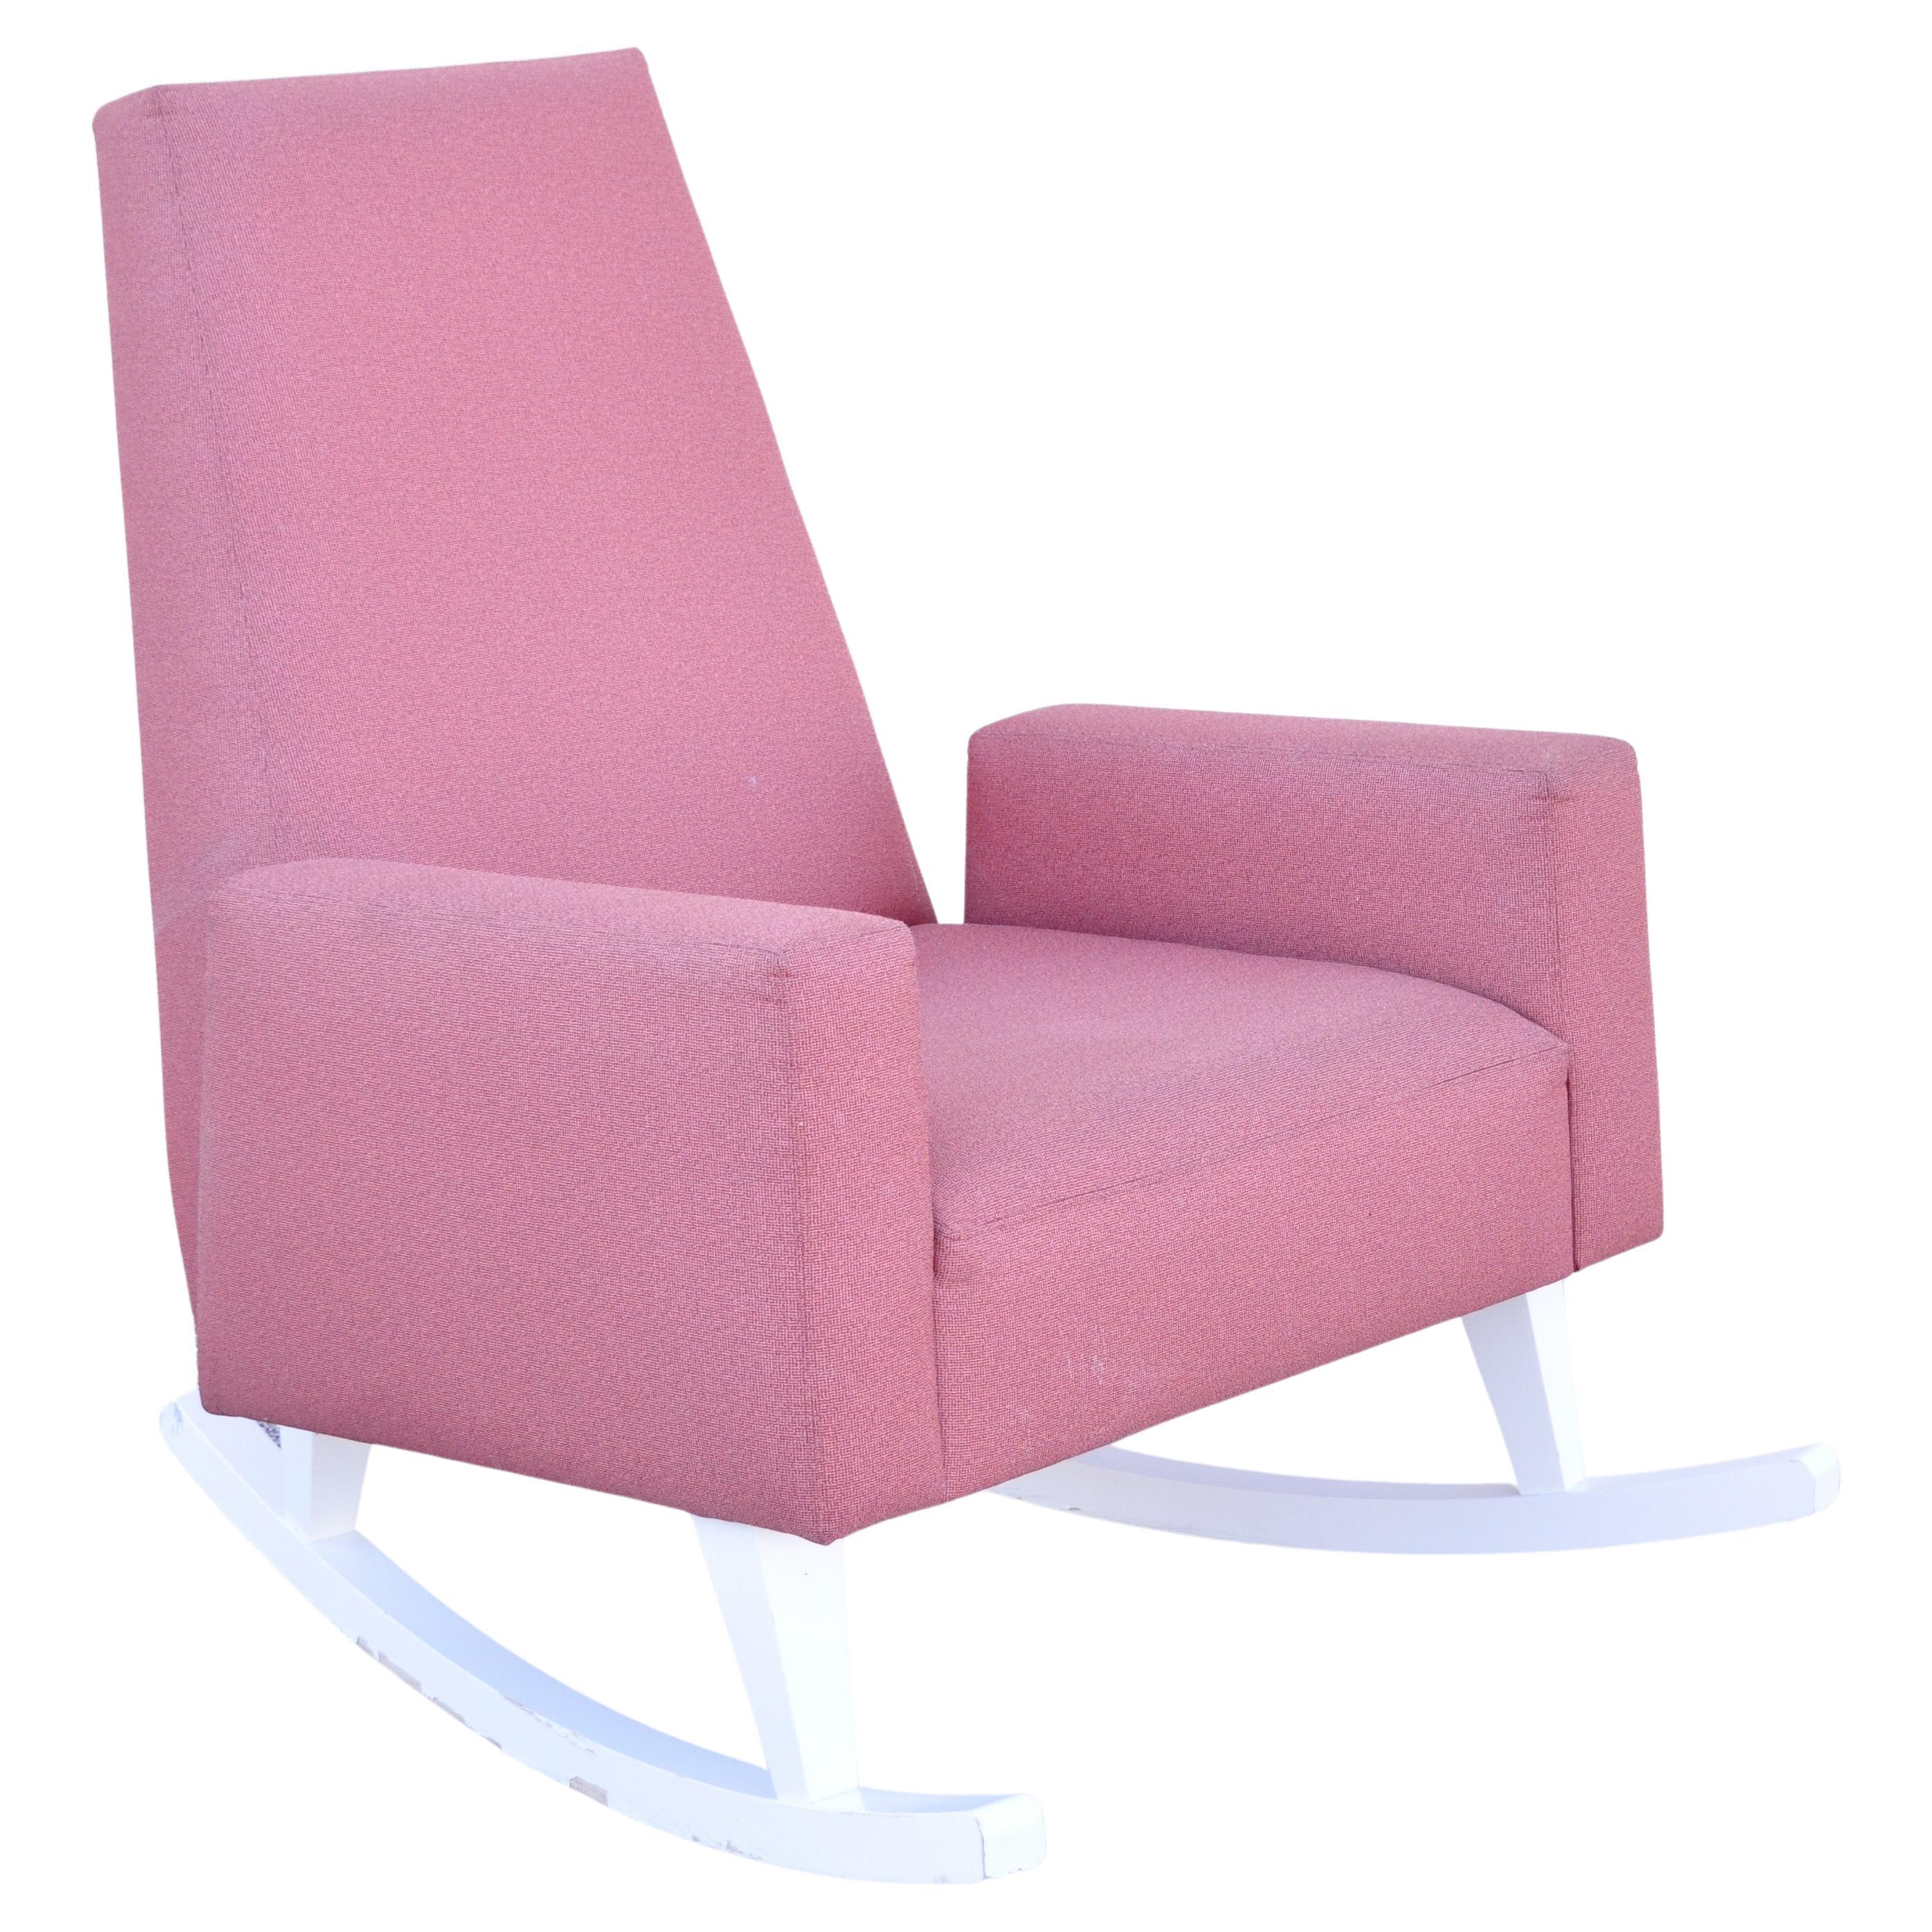 Mid-Century Modern Style Wide Frame Sculptural Upholstered Rocker Rocking Chair For Sale